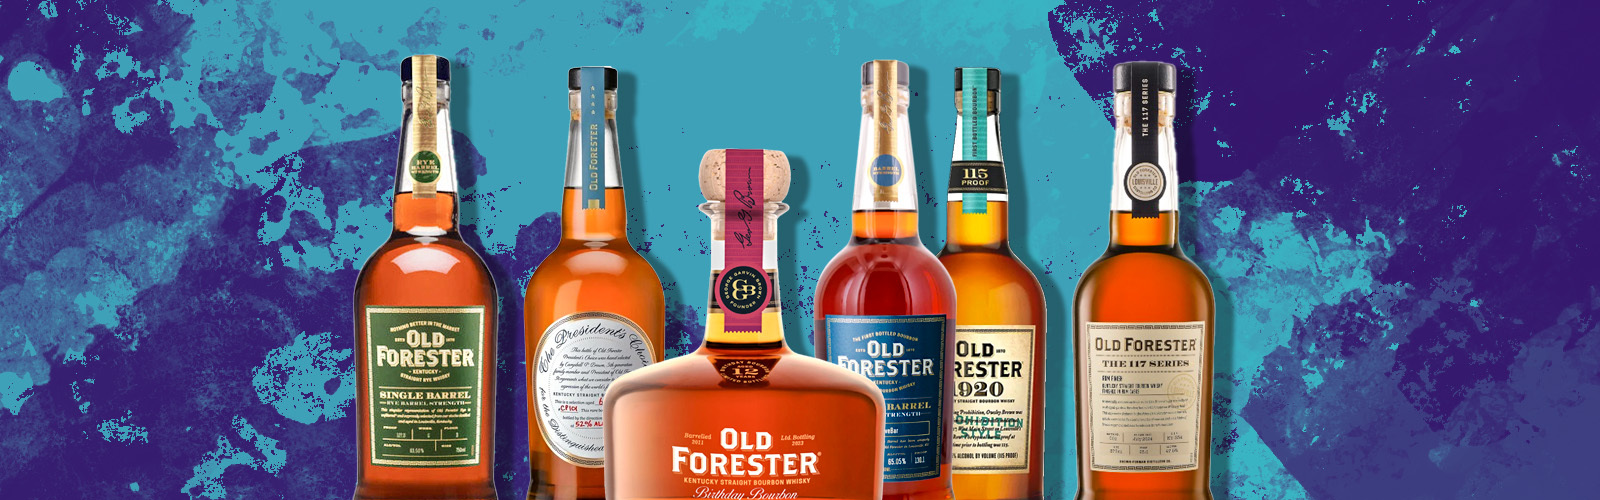 old_forester(1600x500)